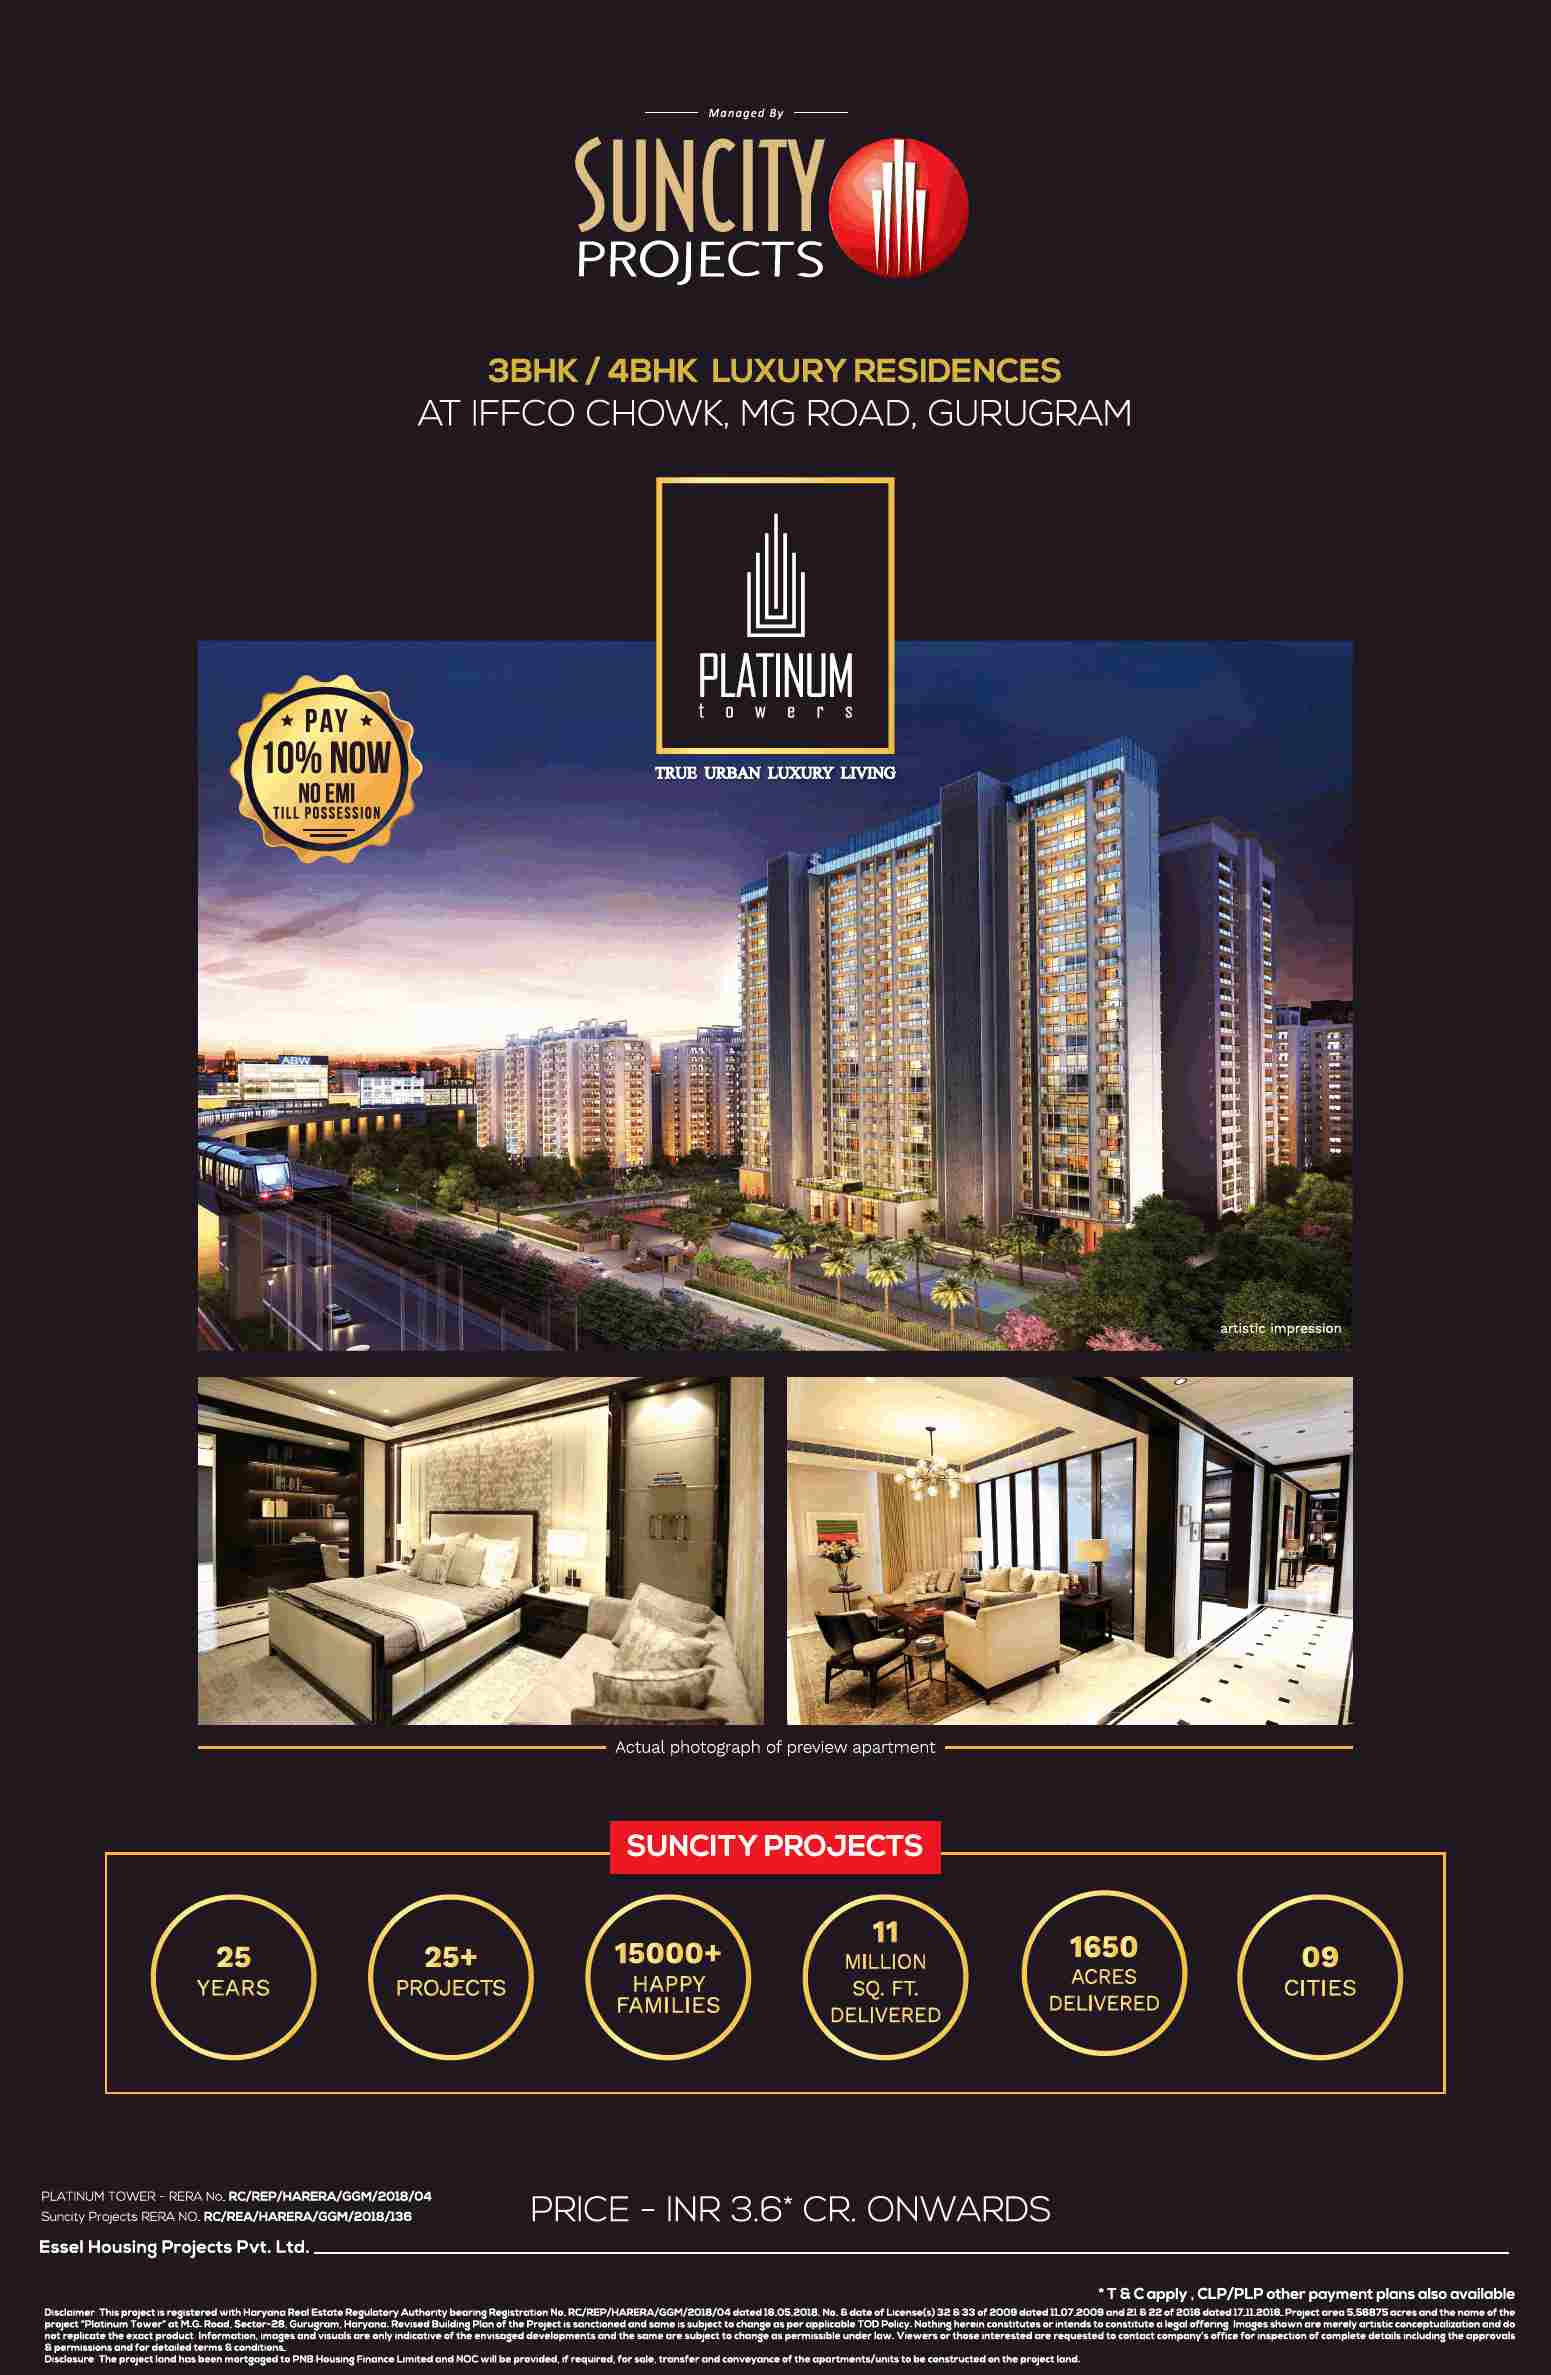 Book 3 & 4 BHK luxury residences @ Rs 3.6 cr at Suncity Platinum Towers in Gurgaon